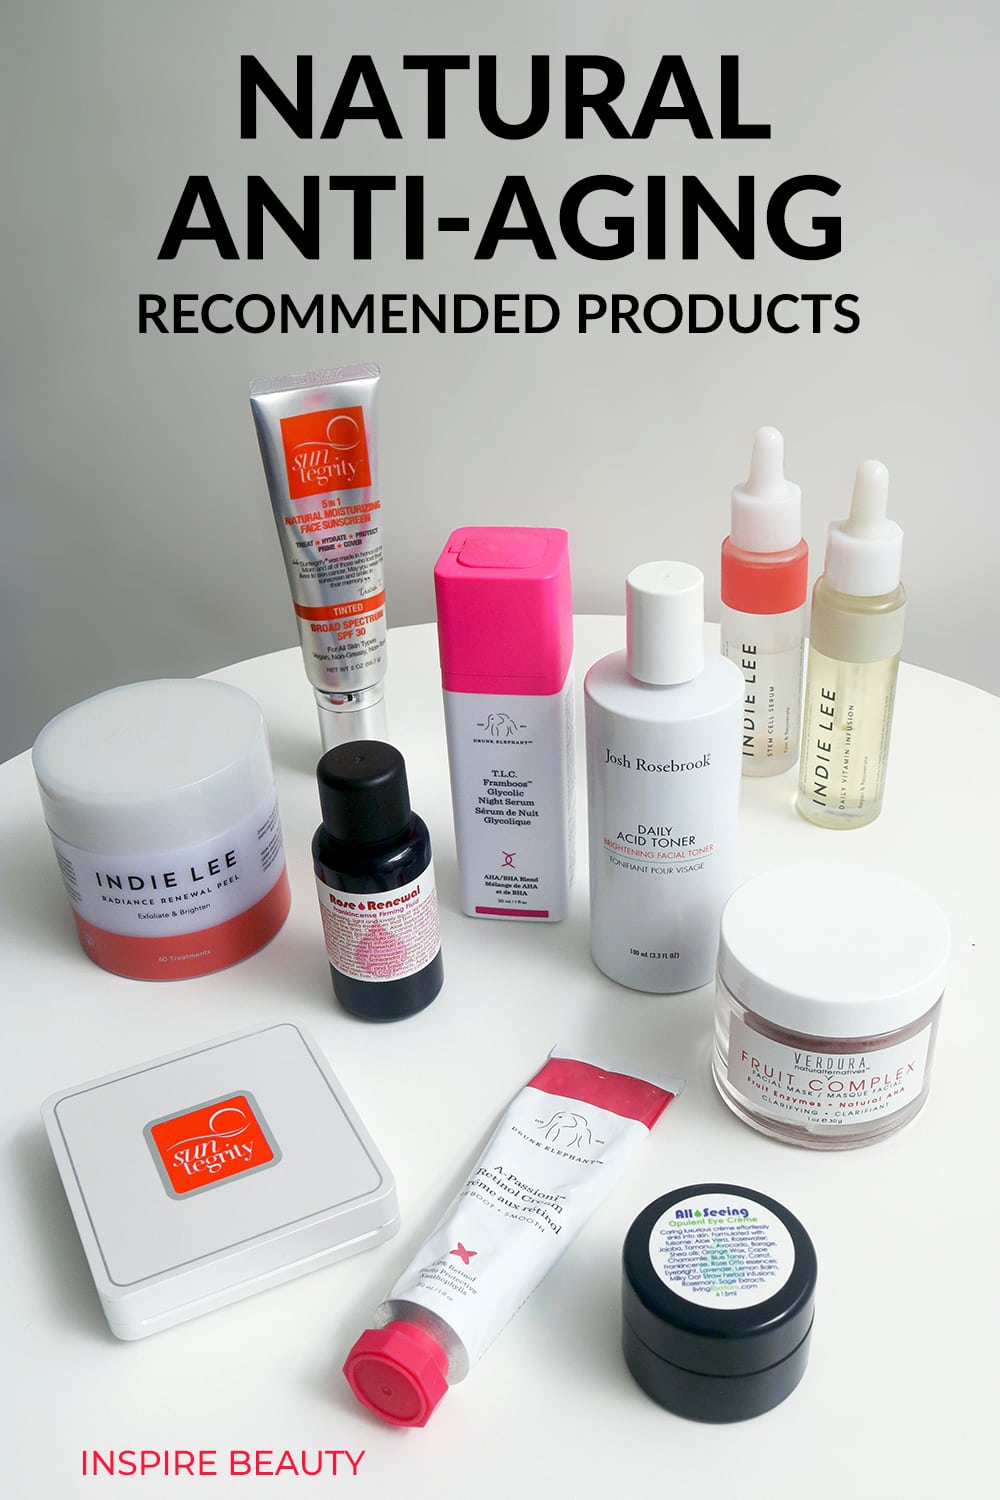 Recommended skin care products for natural anti-aging in your 40s